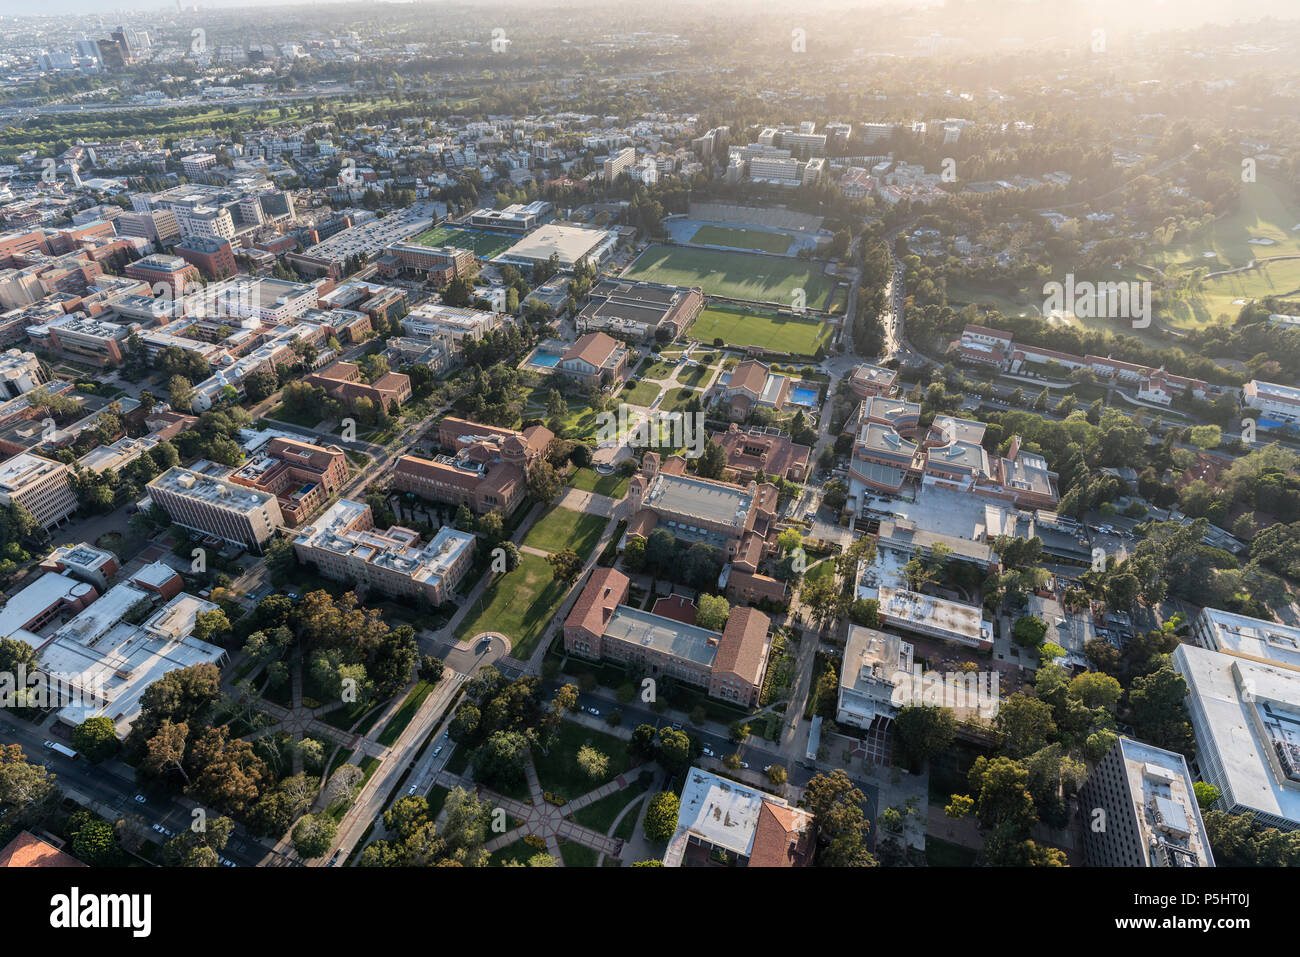 Los Angeles, California, USA - April 18, 2018:  Aerial overview of qbuildings and quad on the UCLA campus near Westwood. Stock Photo